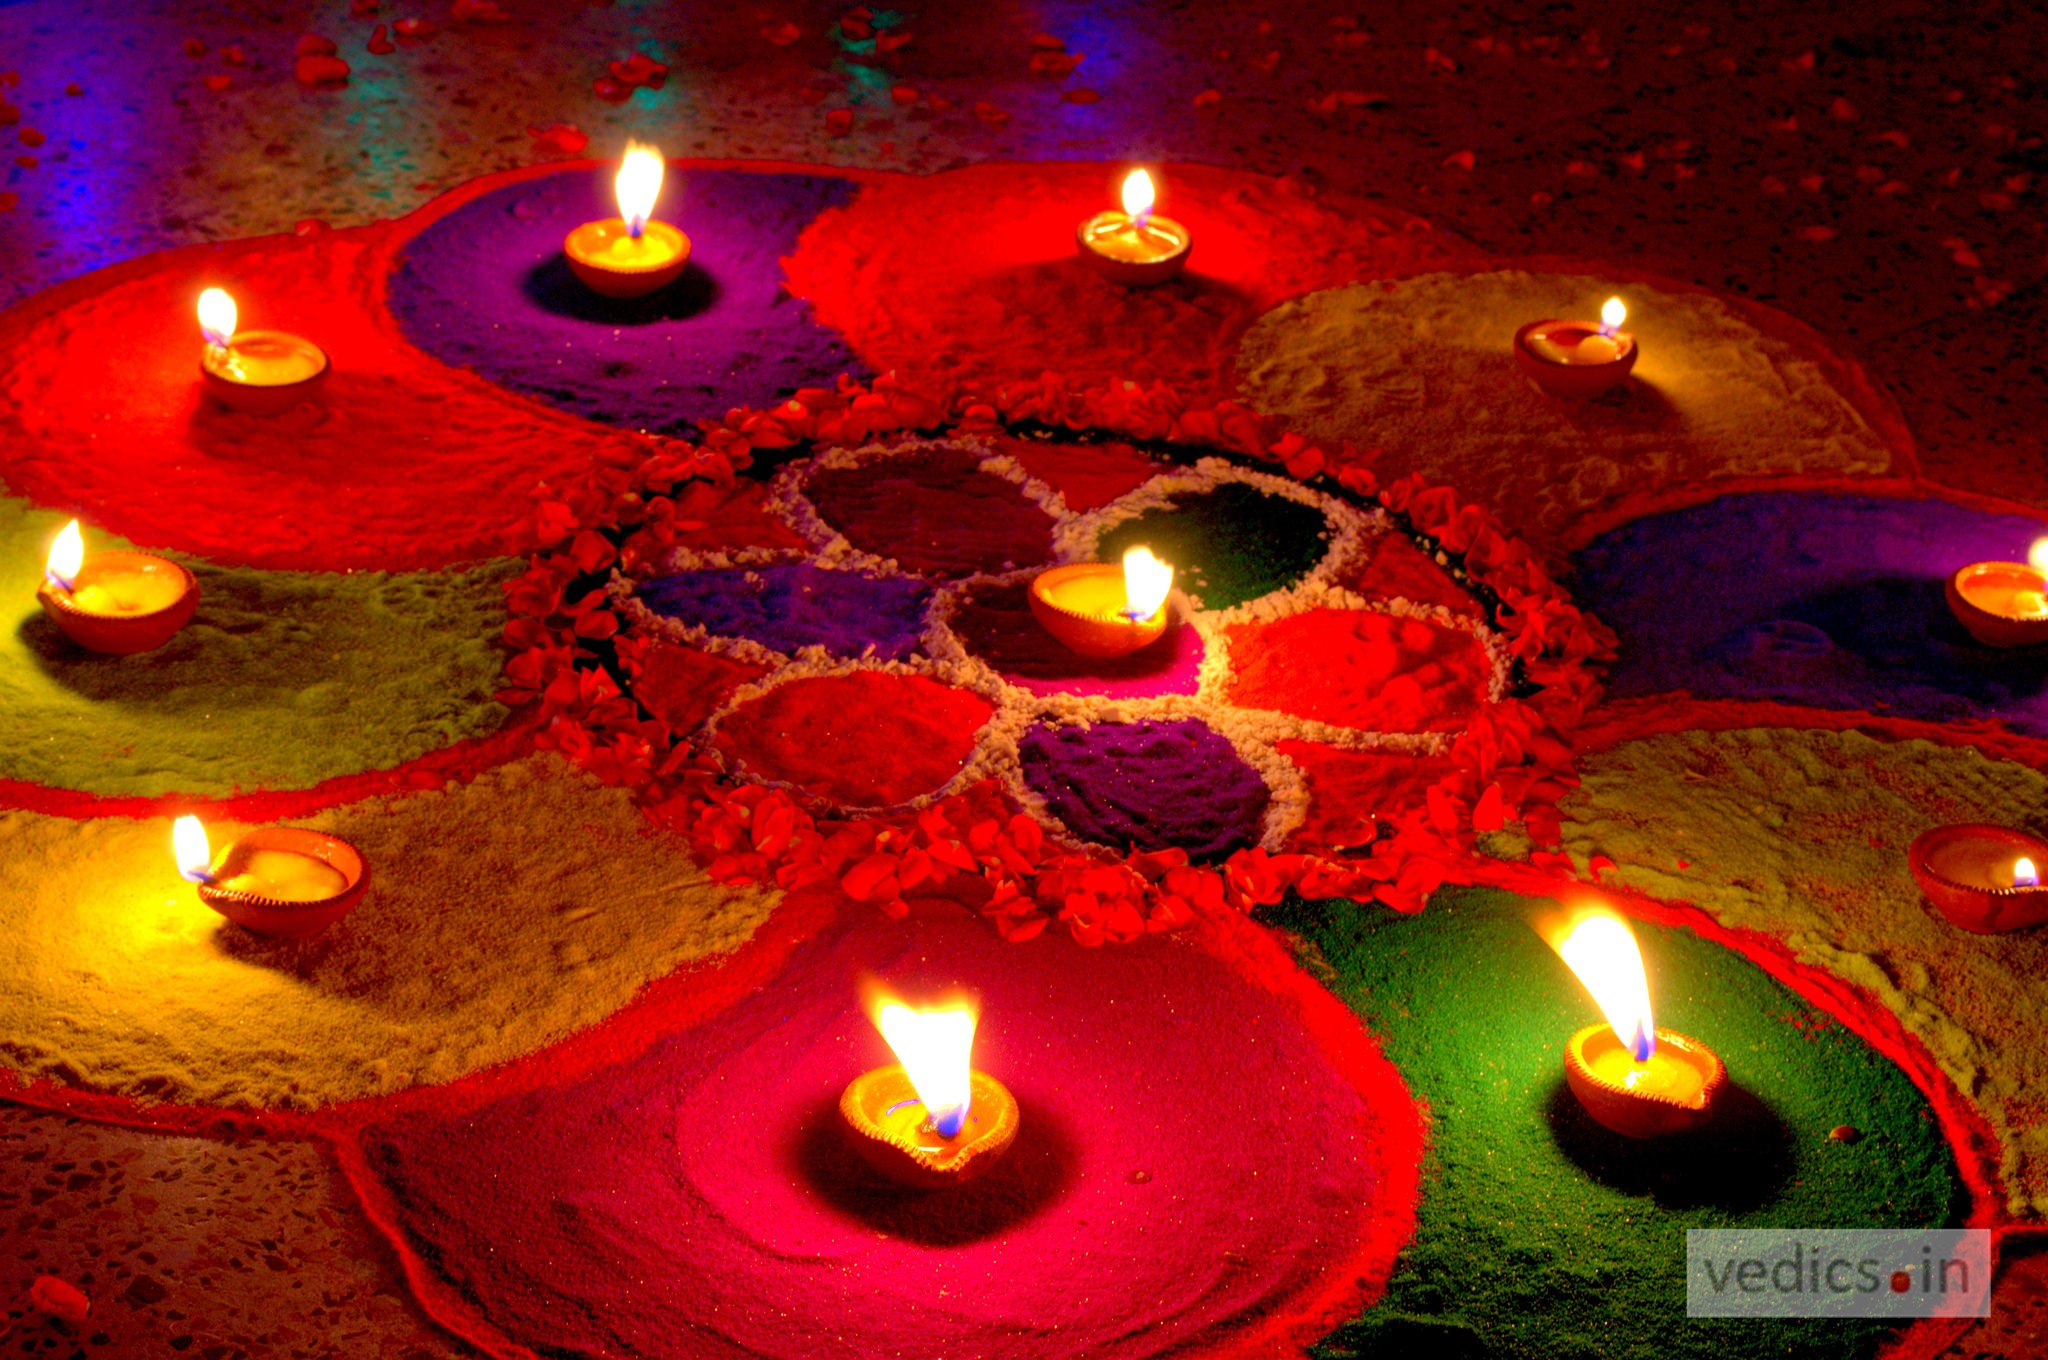 diwali-festival-its-significance-things-we-should-know-vedics